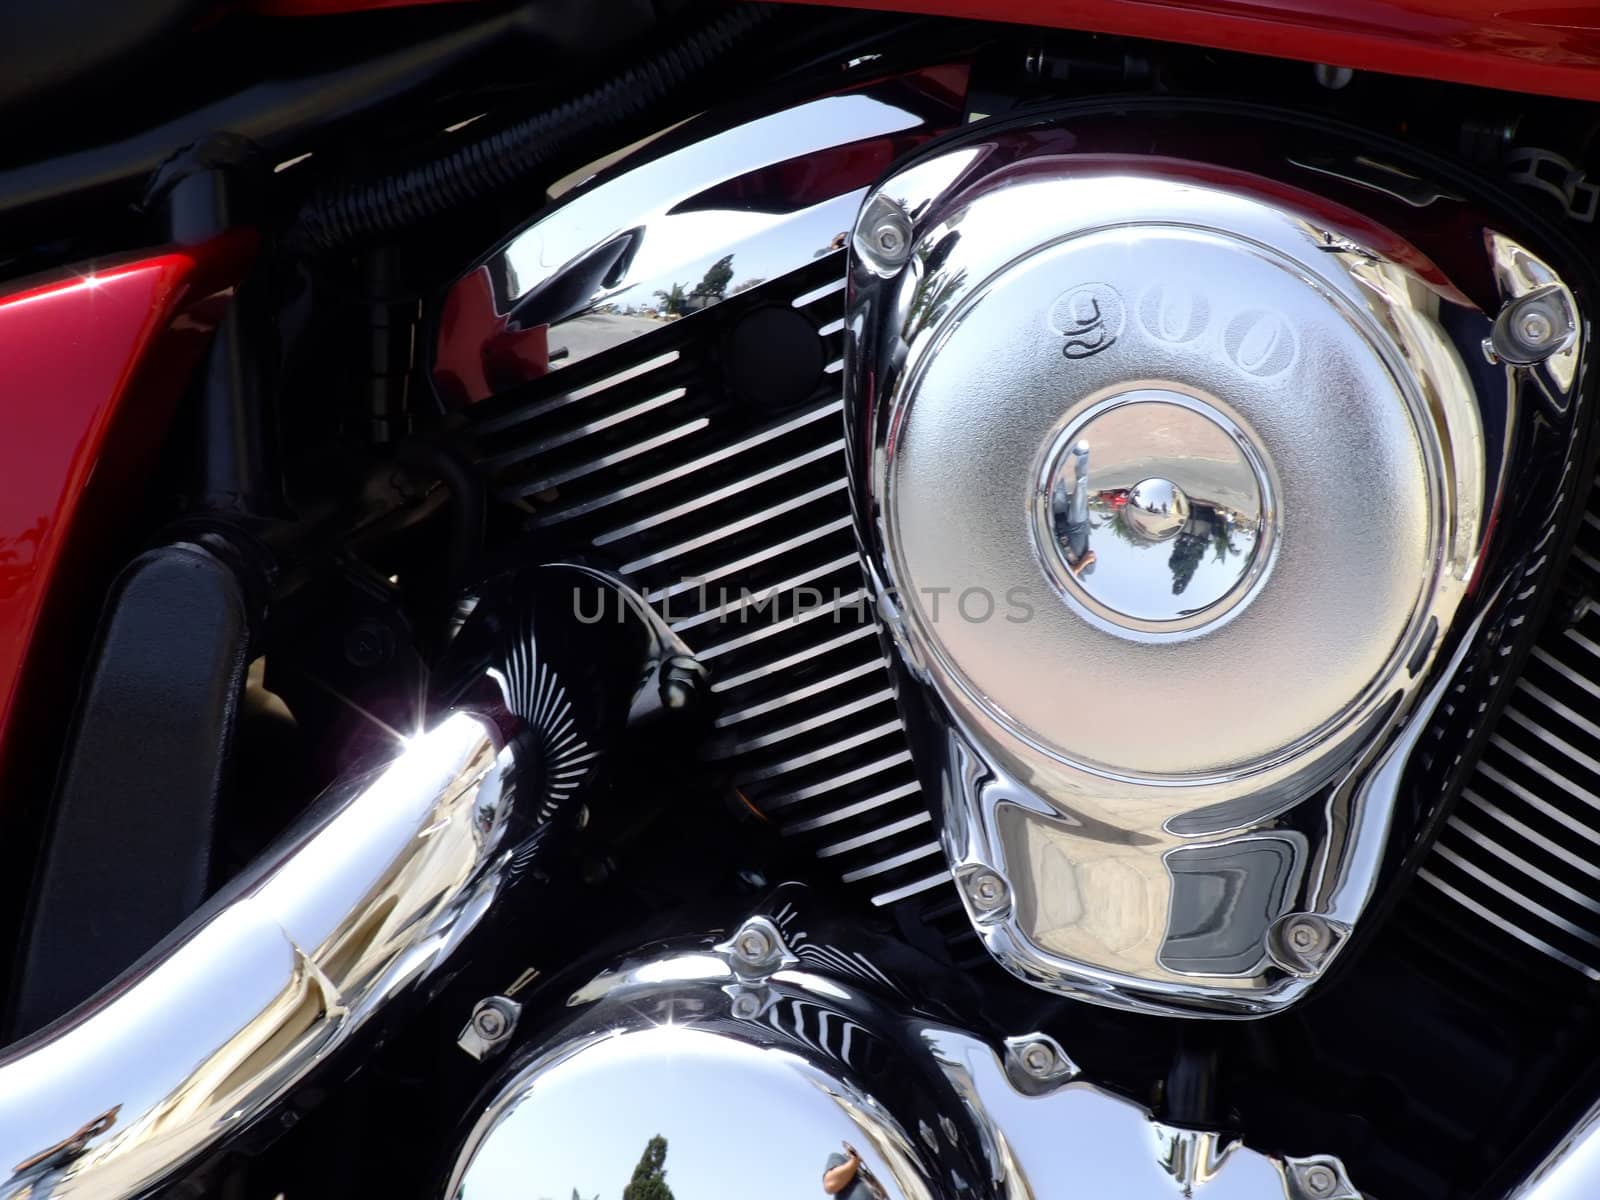 Custom bike V engine, showing off shining chrome and in tip top condition